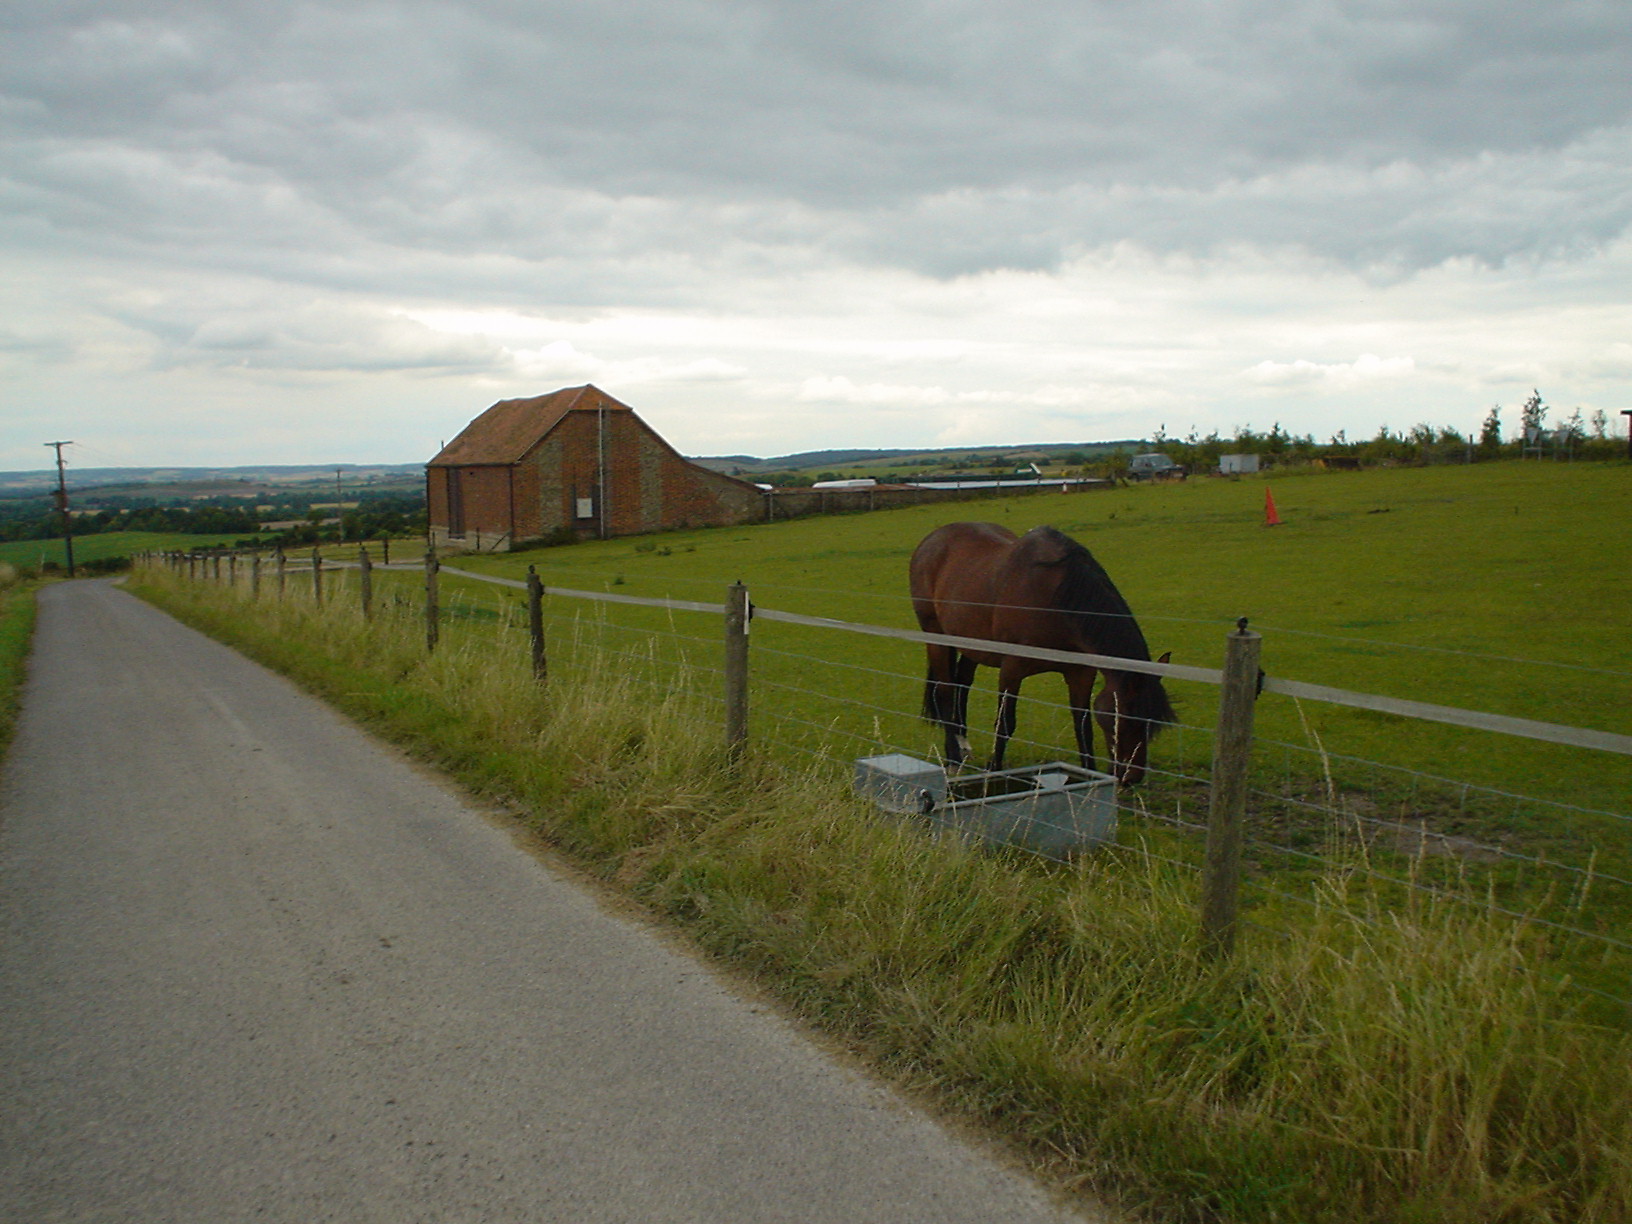 a horse drinking from a bucket near a road